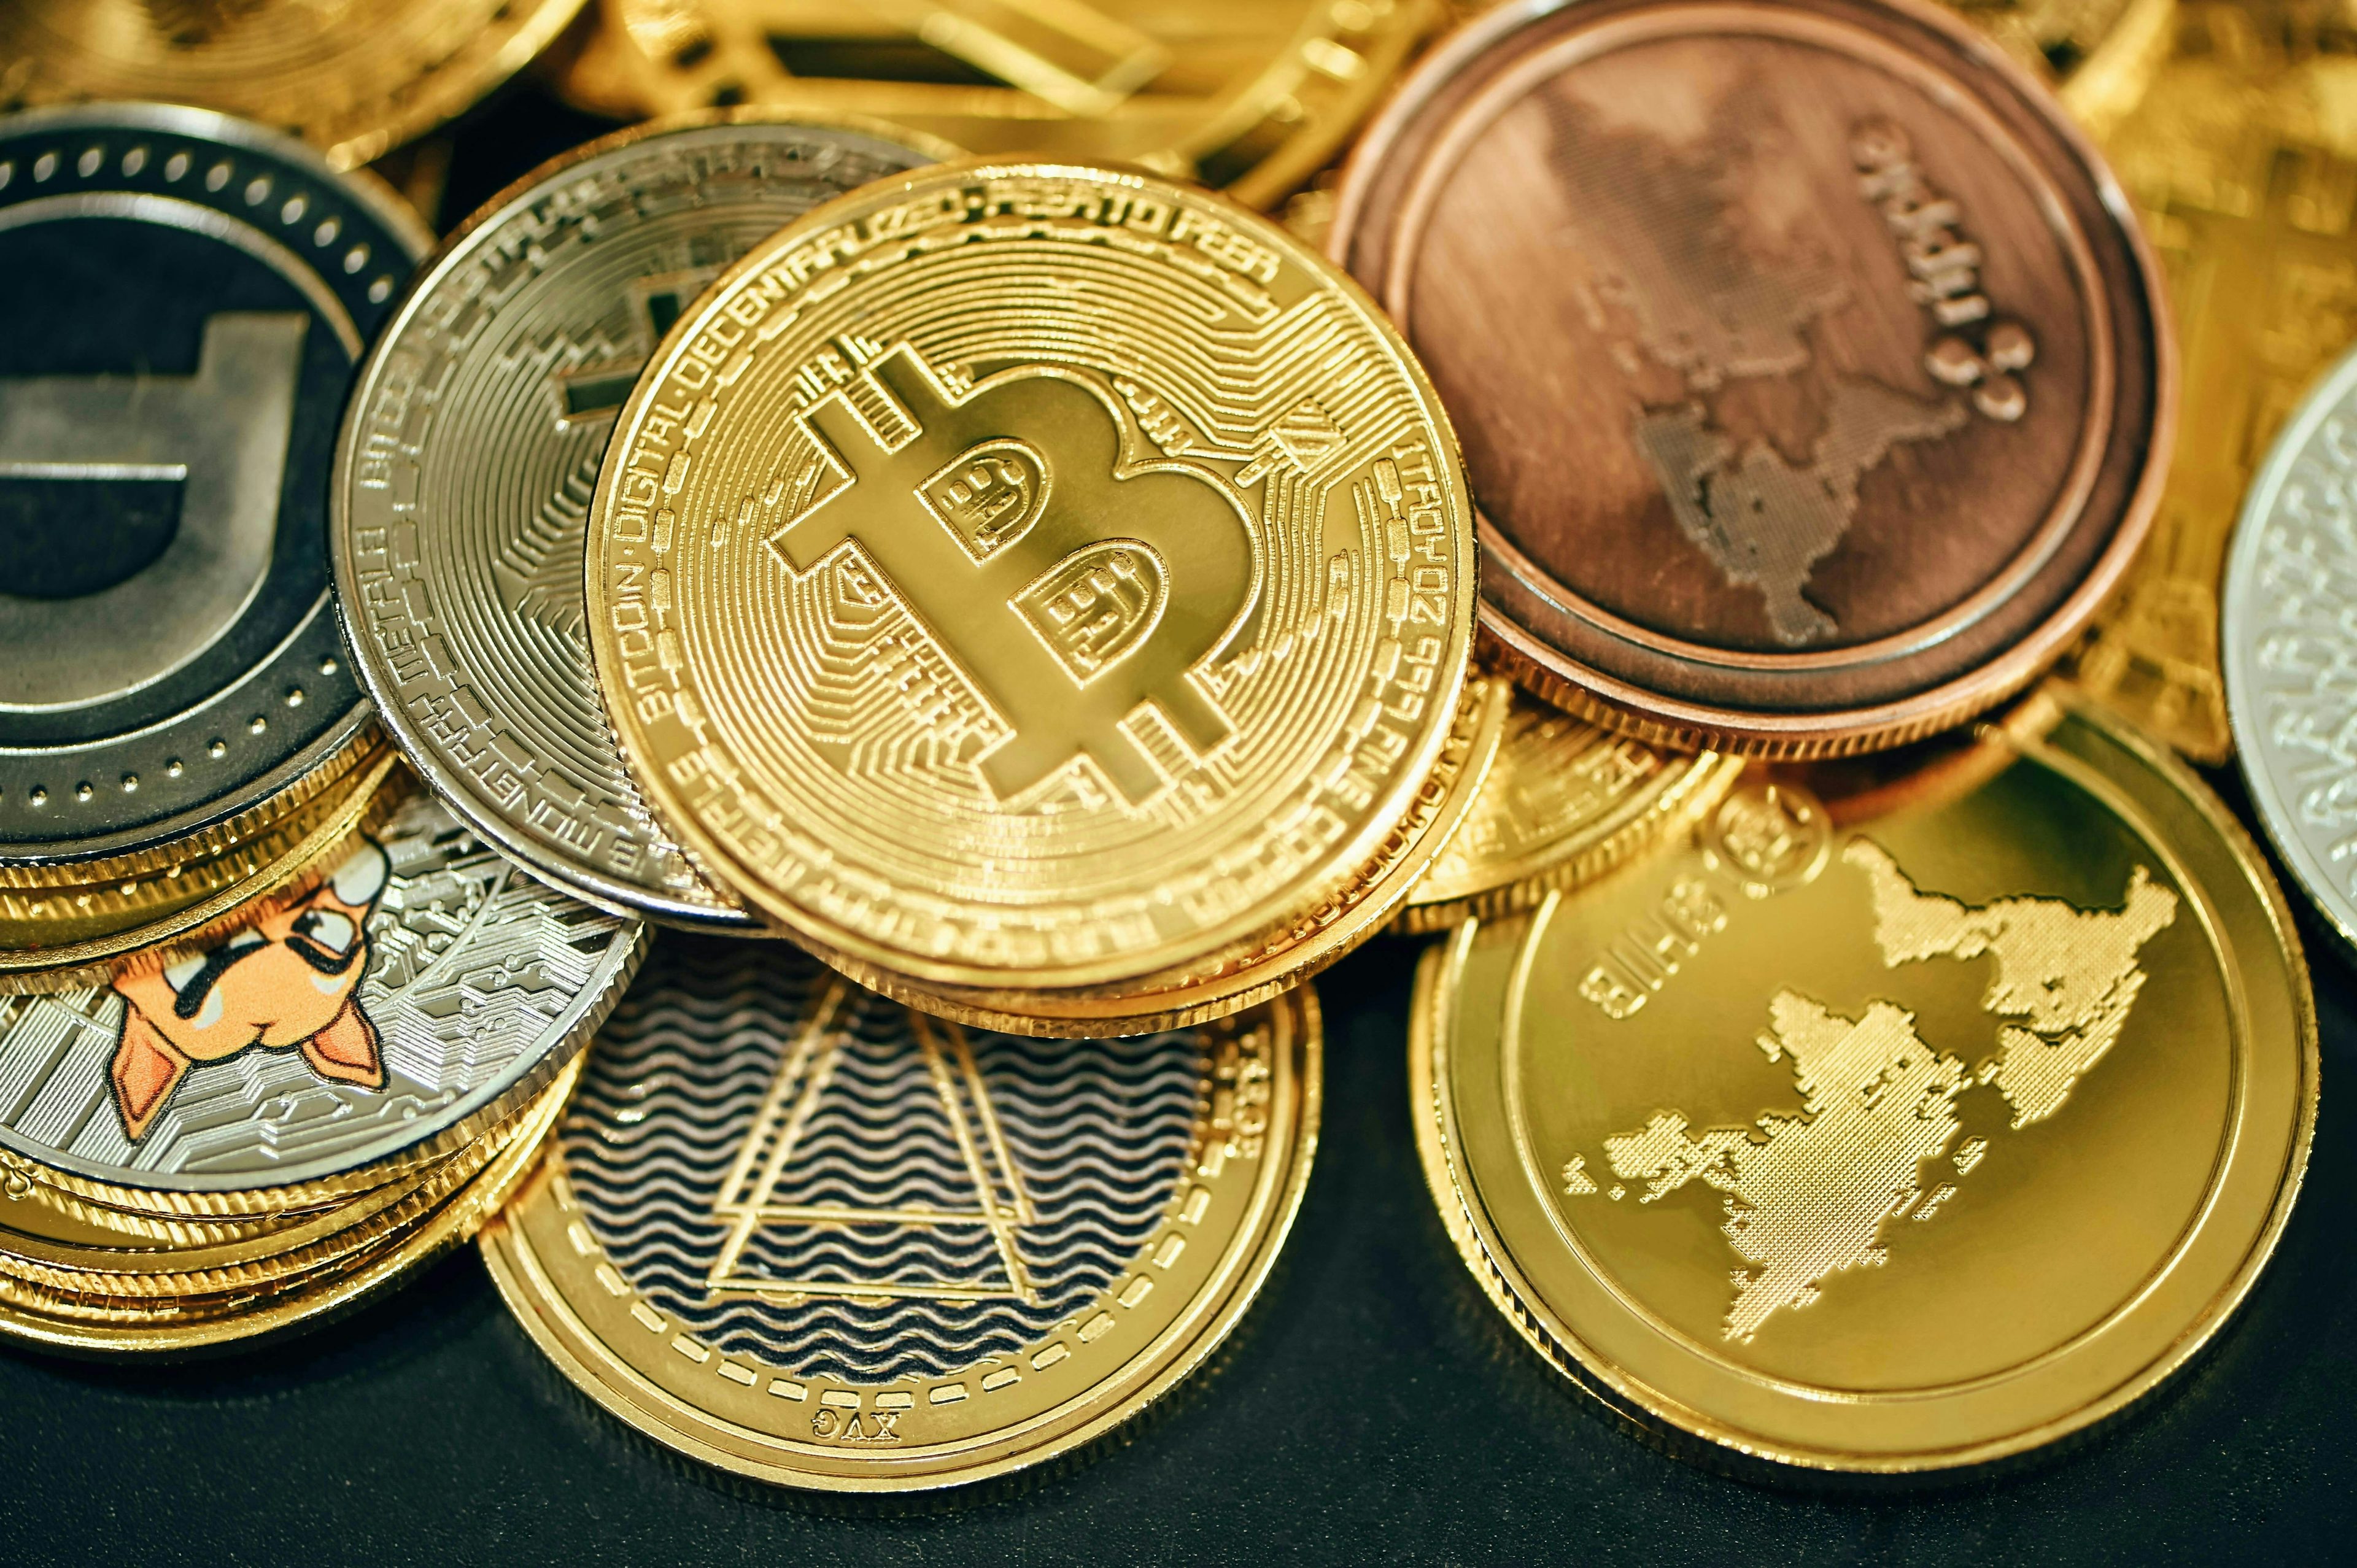 An image displaying an assortment of various cryptocurrency coins, each distinguished by unique symbols and designs representative of different digital currencies. The collection includes well-known coins such as Bitcoin, Ethereum, and Ripple, among others, arranged closely together to showcase the diversity within the cryptocurrency market.